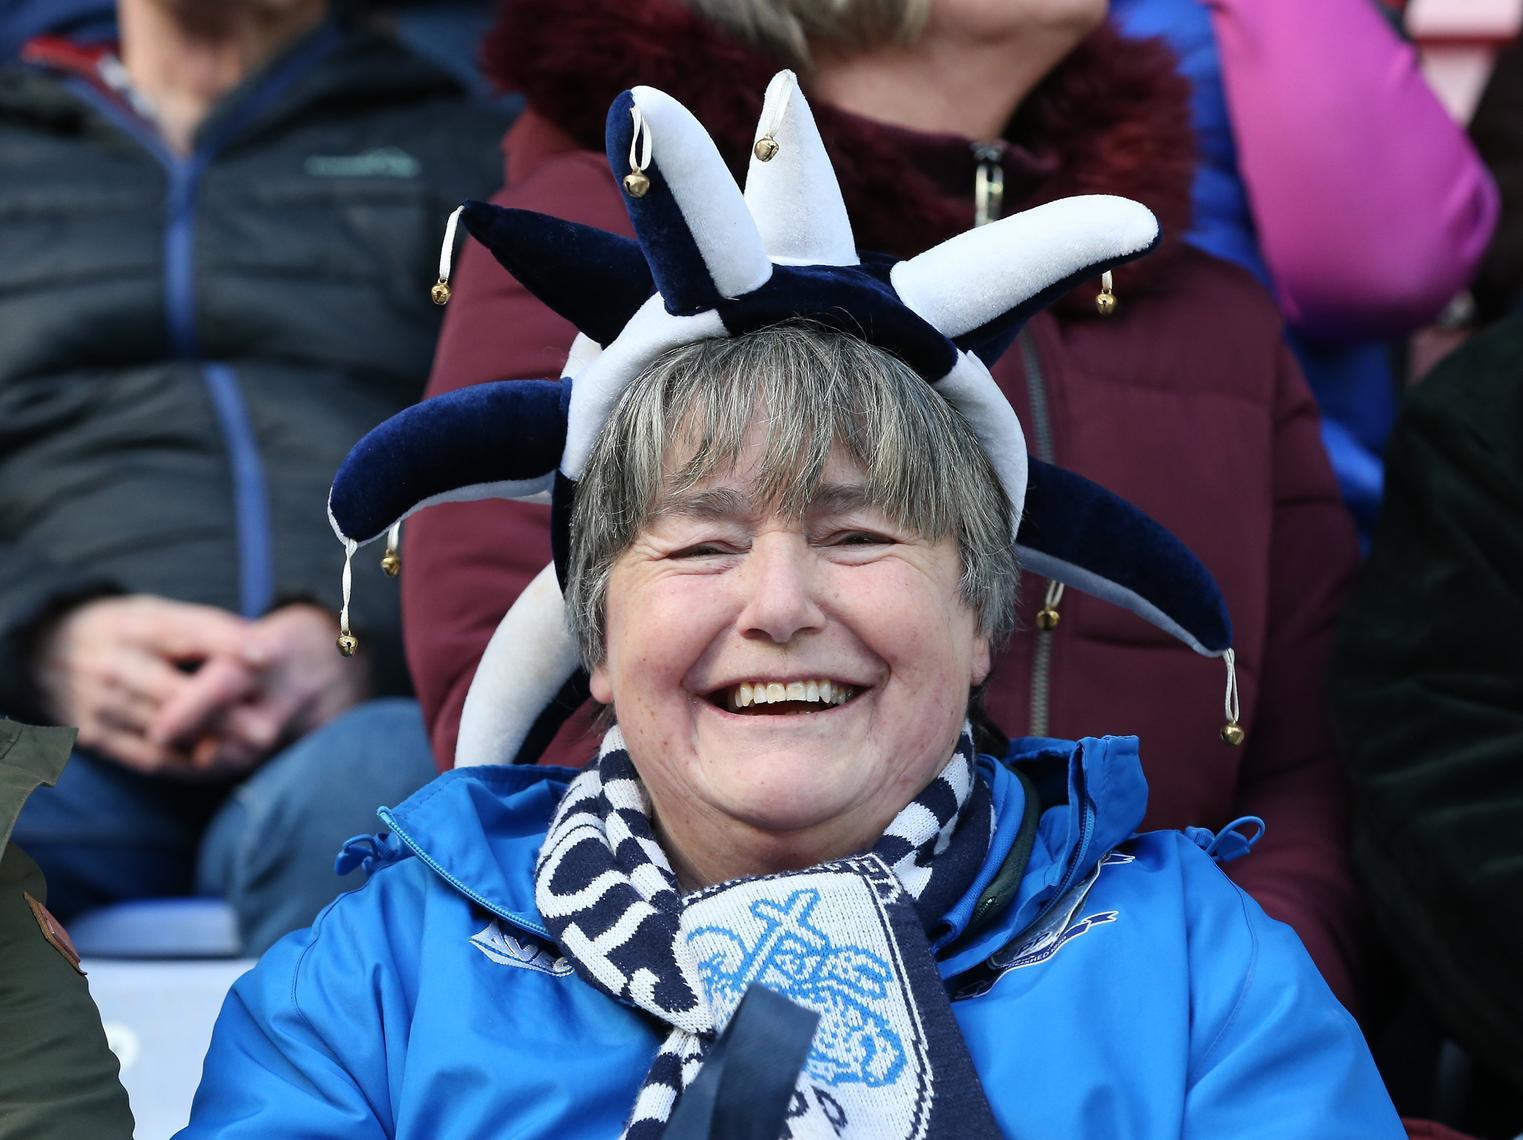 In all the PNE gear, one fan gives a big smile to our camera before the 2-1 win.